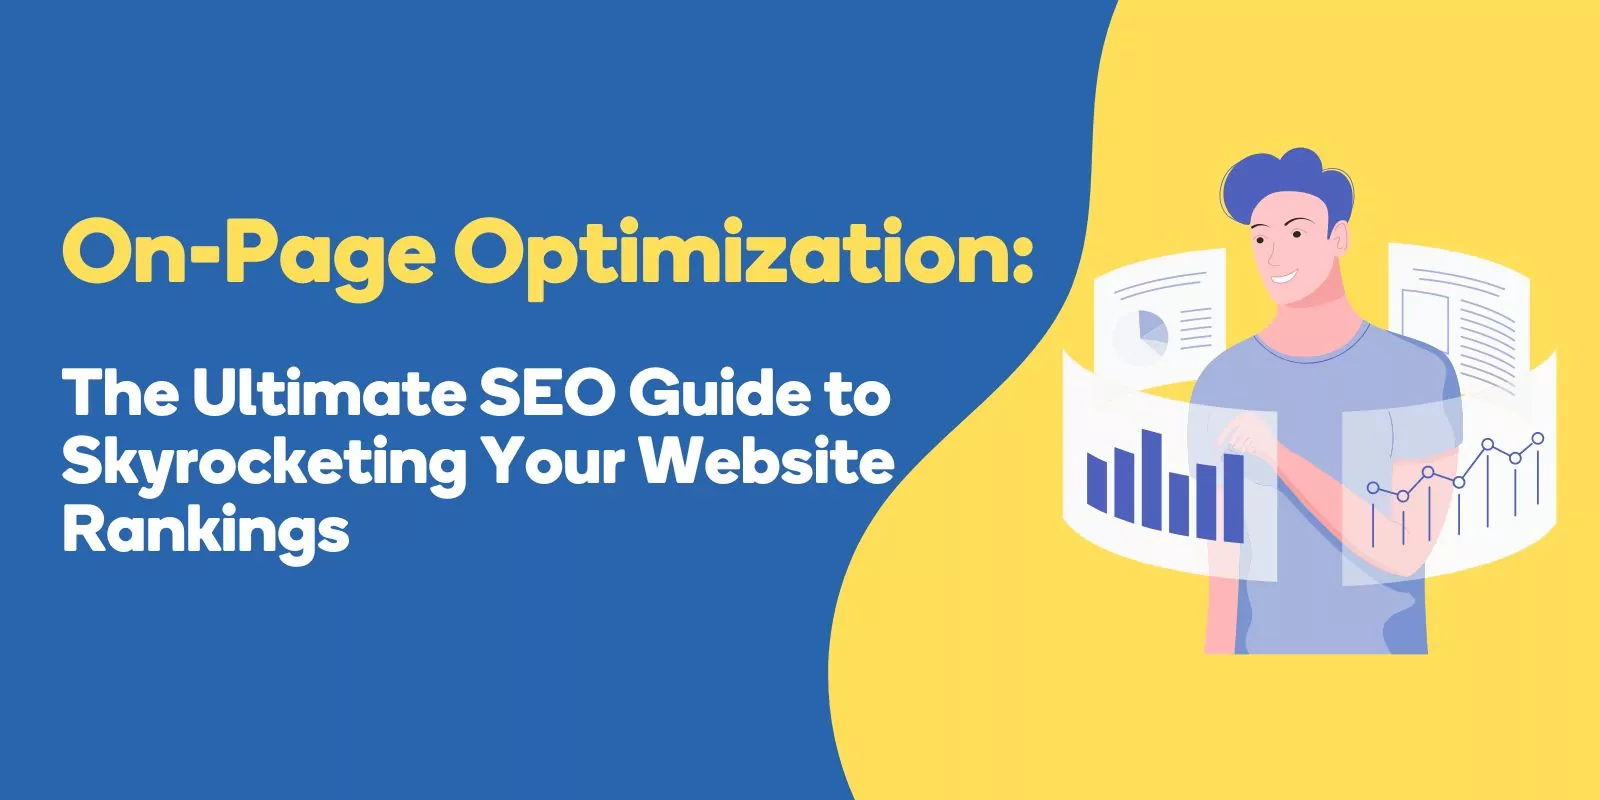 On-Page Optimization: The Ultimate SEO Guide to Skyrocketing Your Website Rankings